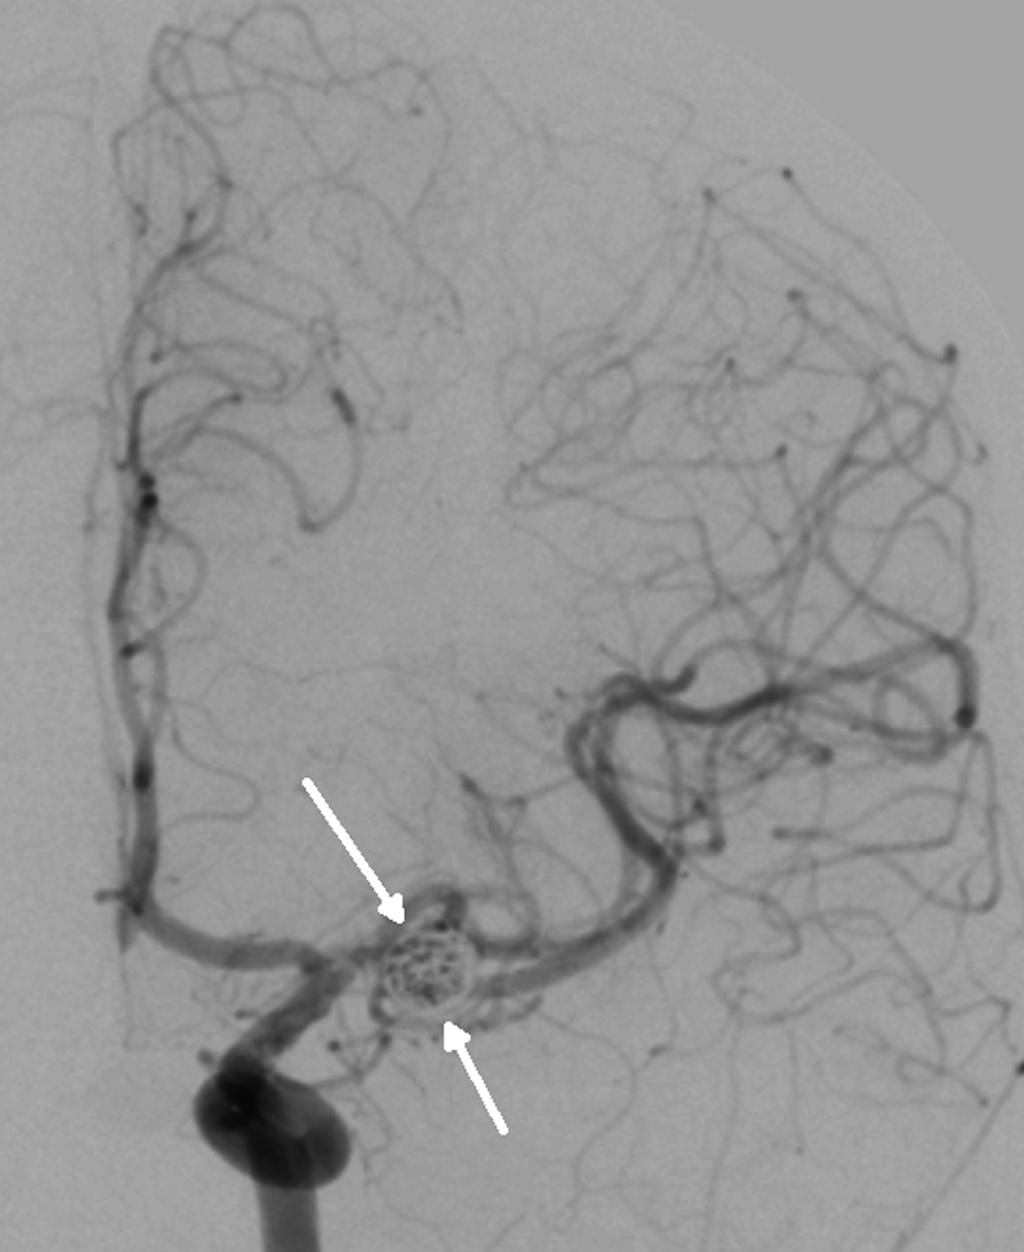 Case Report Y-stent assisted CE of wide-necked aneurysms Figure 4: Left internal carotid angiogram 3 months post-embolisation showing only about 30% of the MCA aneurysm opacified with patency of both